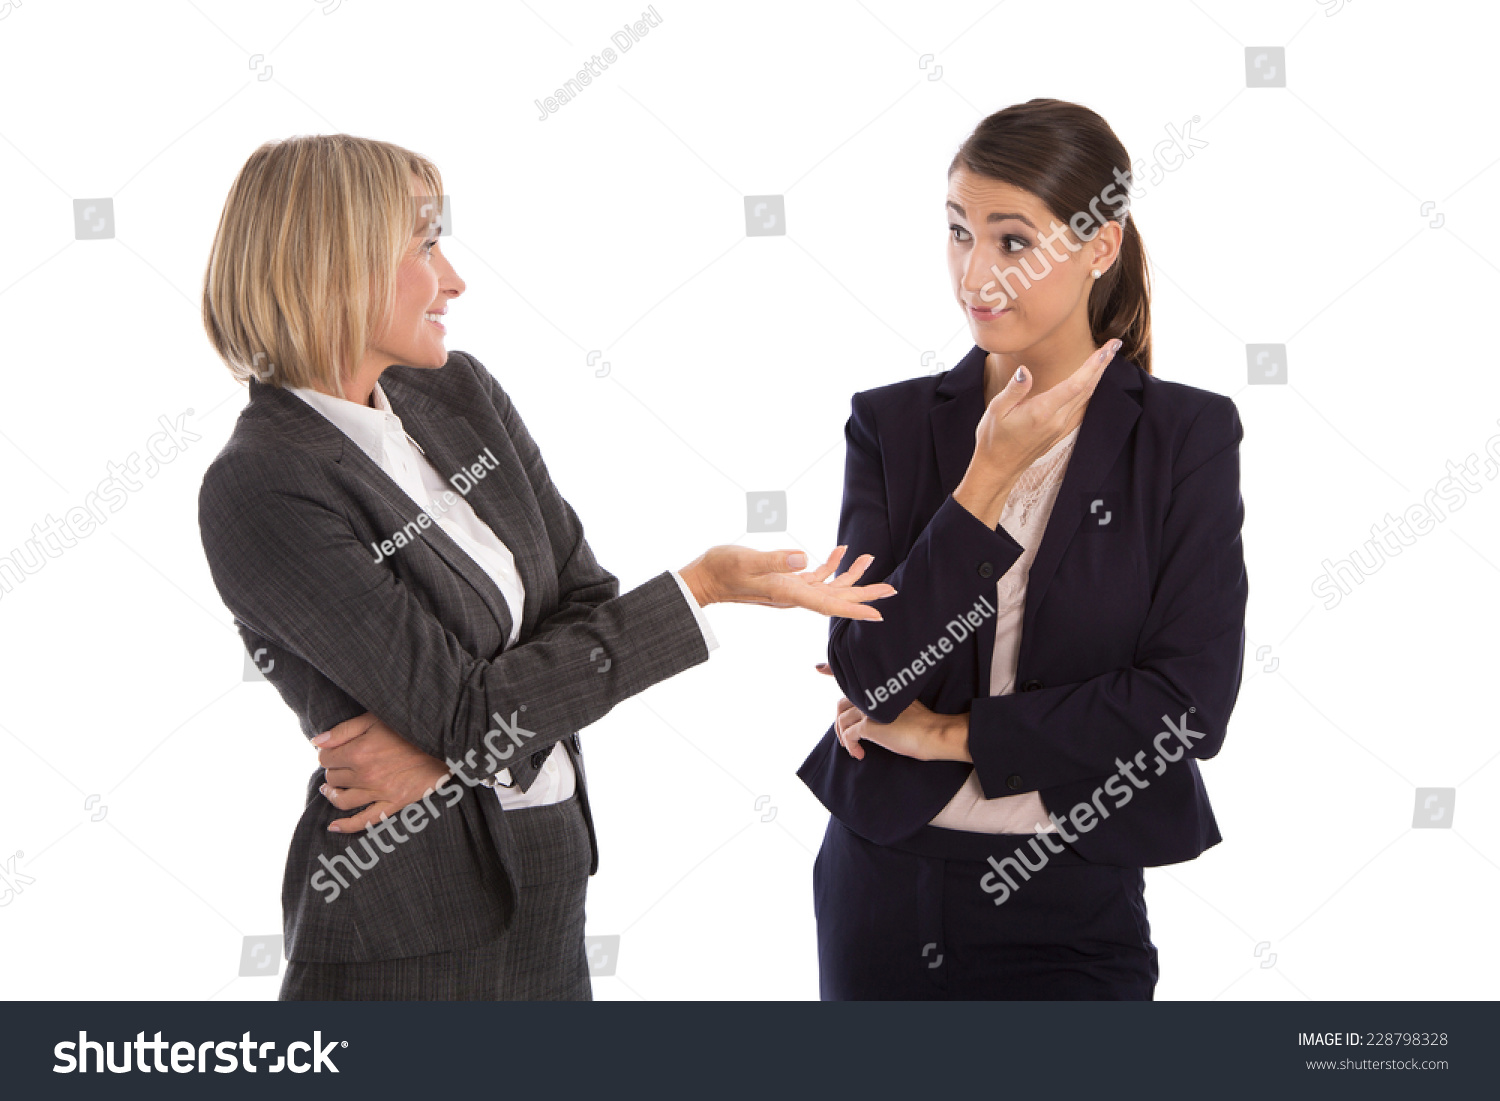 Two isolated businesswoman talking together: concept for body language. #228798328